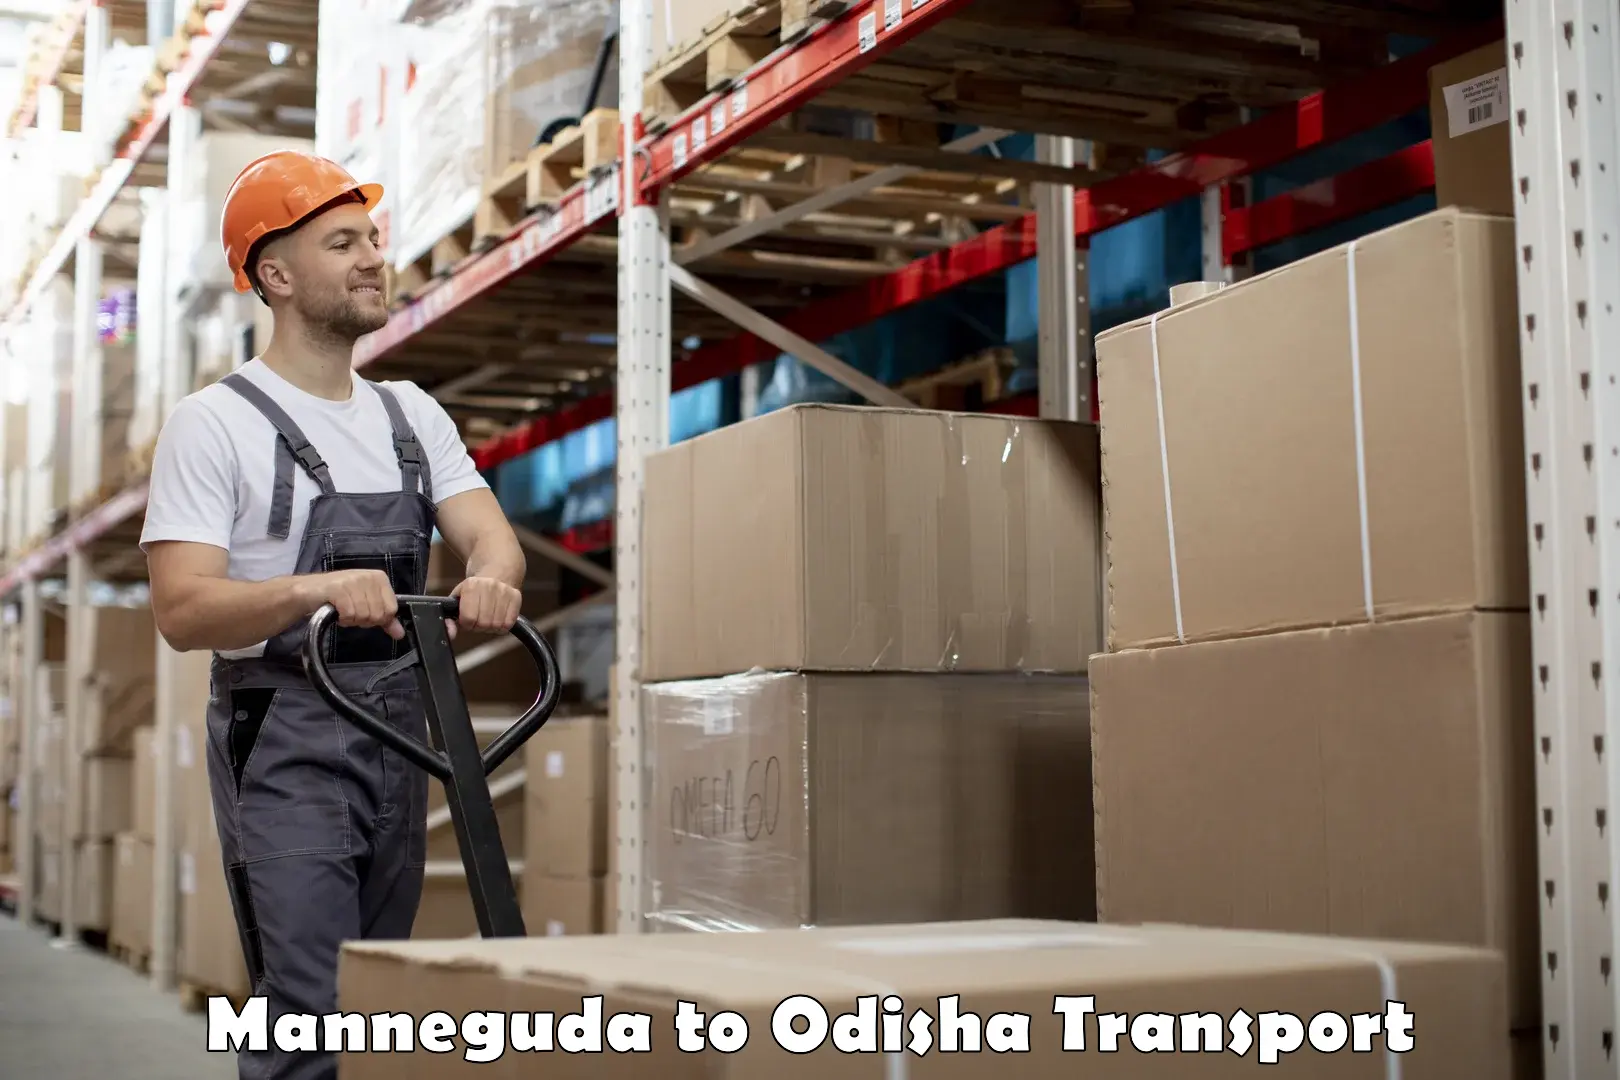 Truck transport companies in India Manneguda to Umerkote